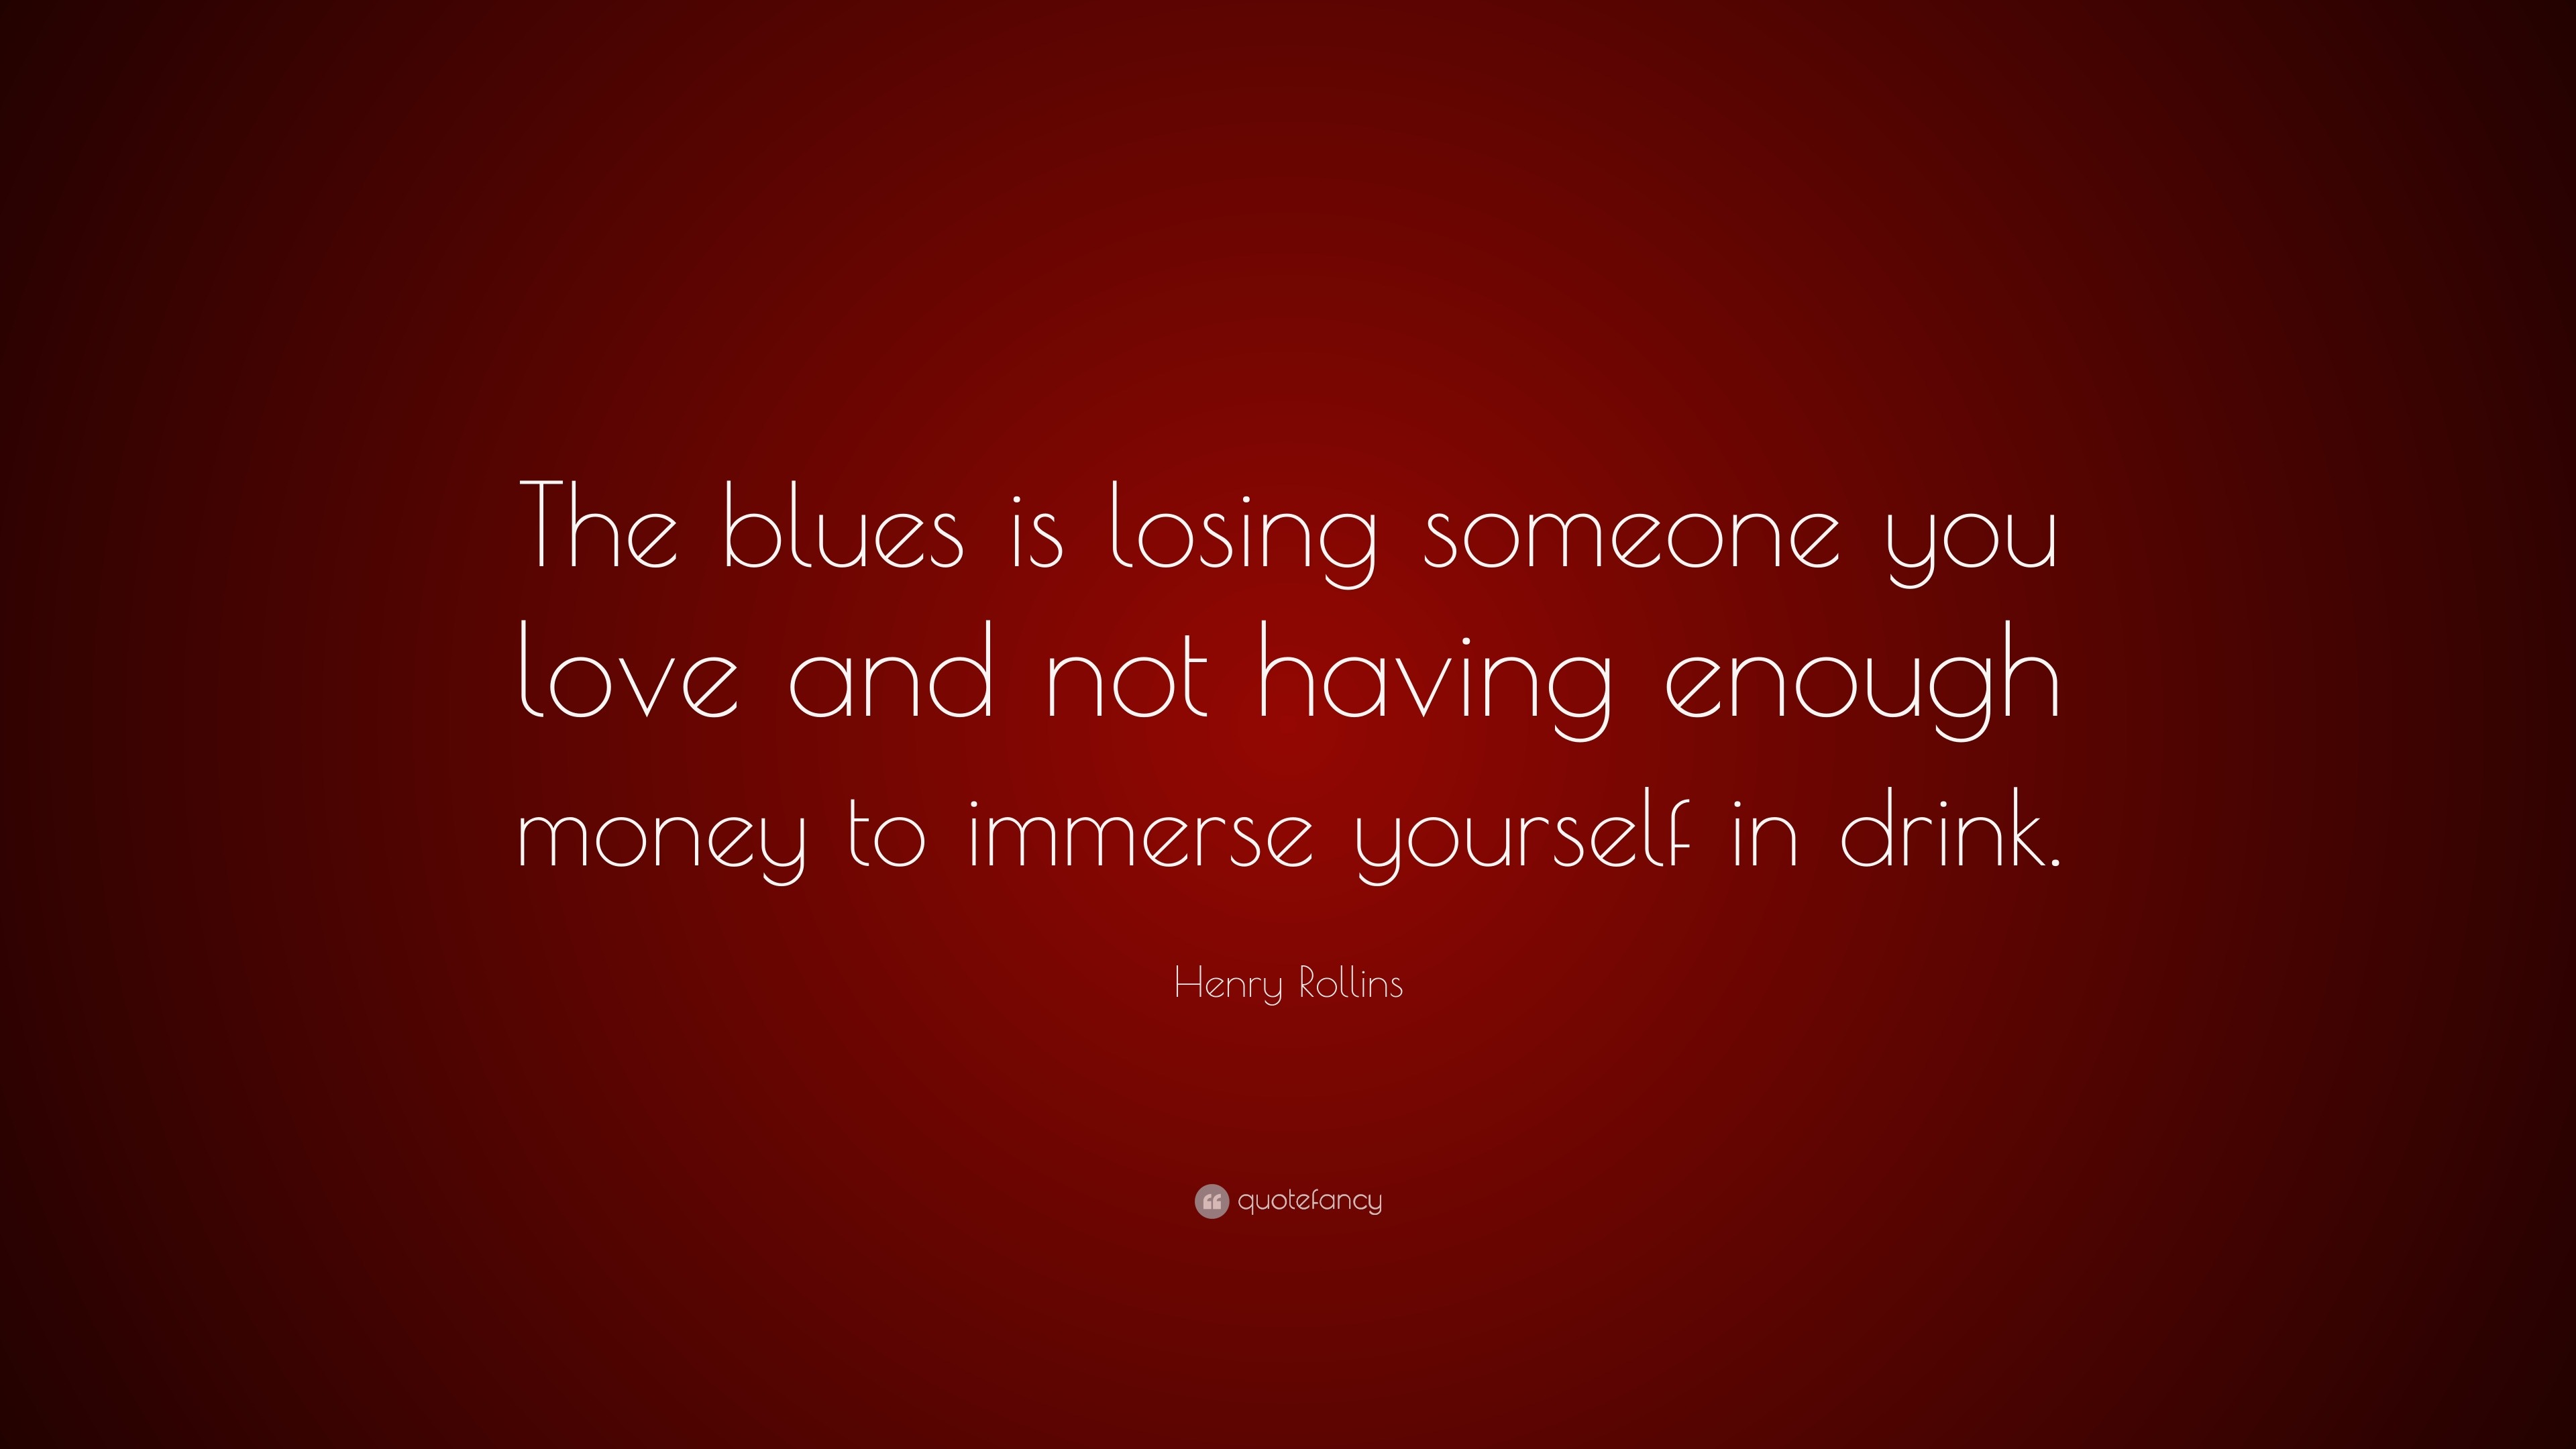 Henry Rollins Quote “The blues is losing someone you love and not having enough